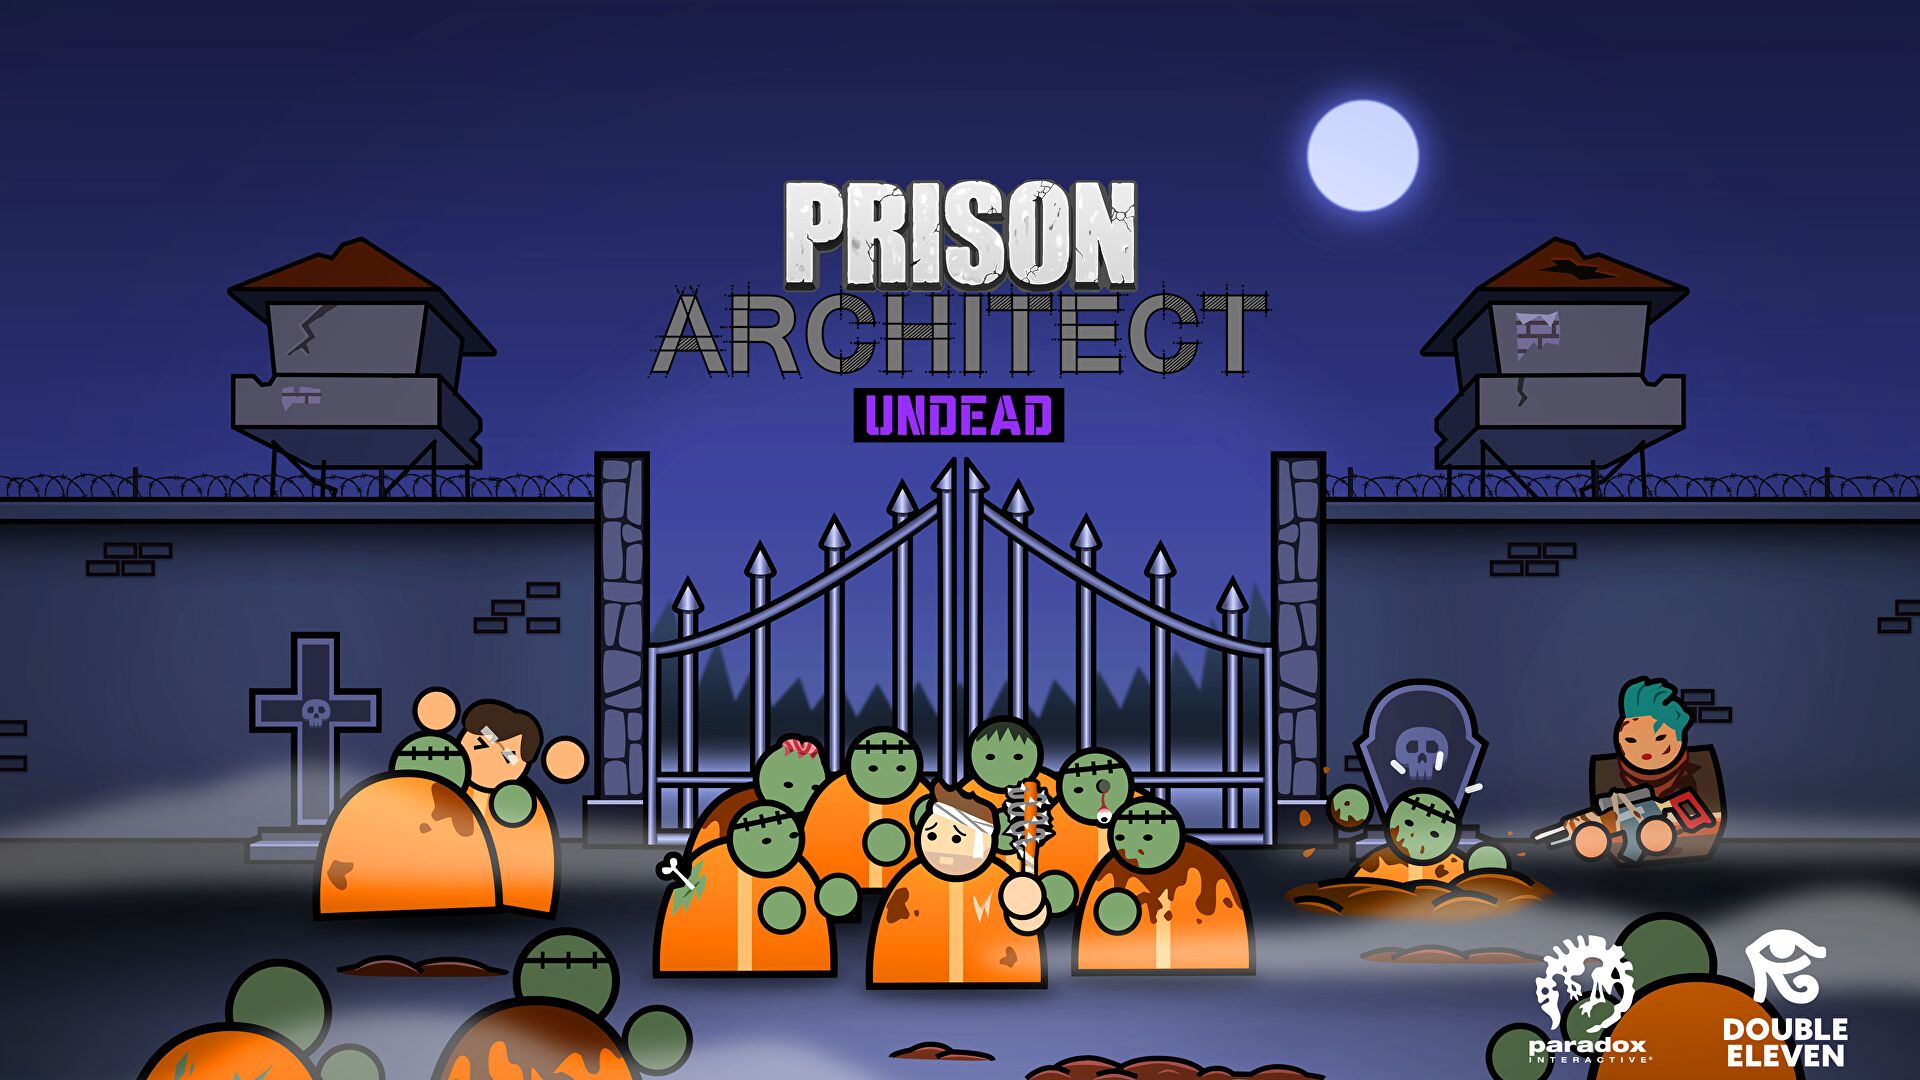 The key for Prison Architect's Undead expansion, showing zombies attacking prisoners.